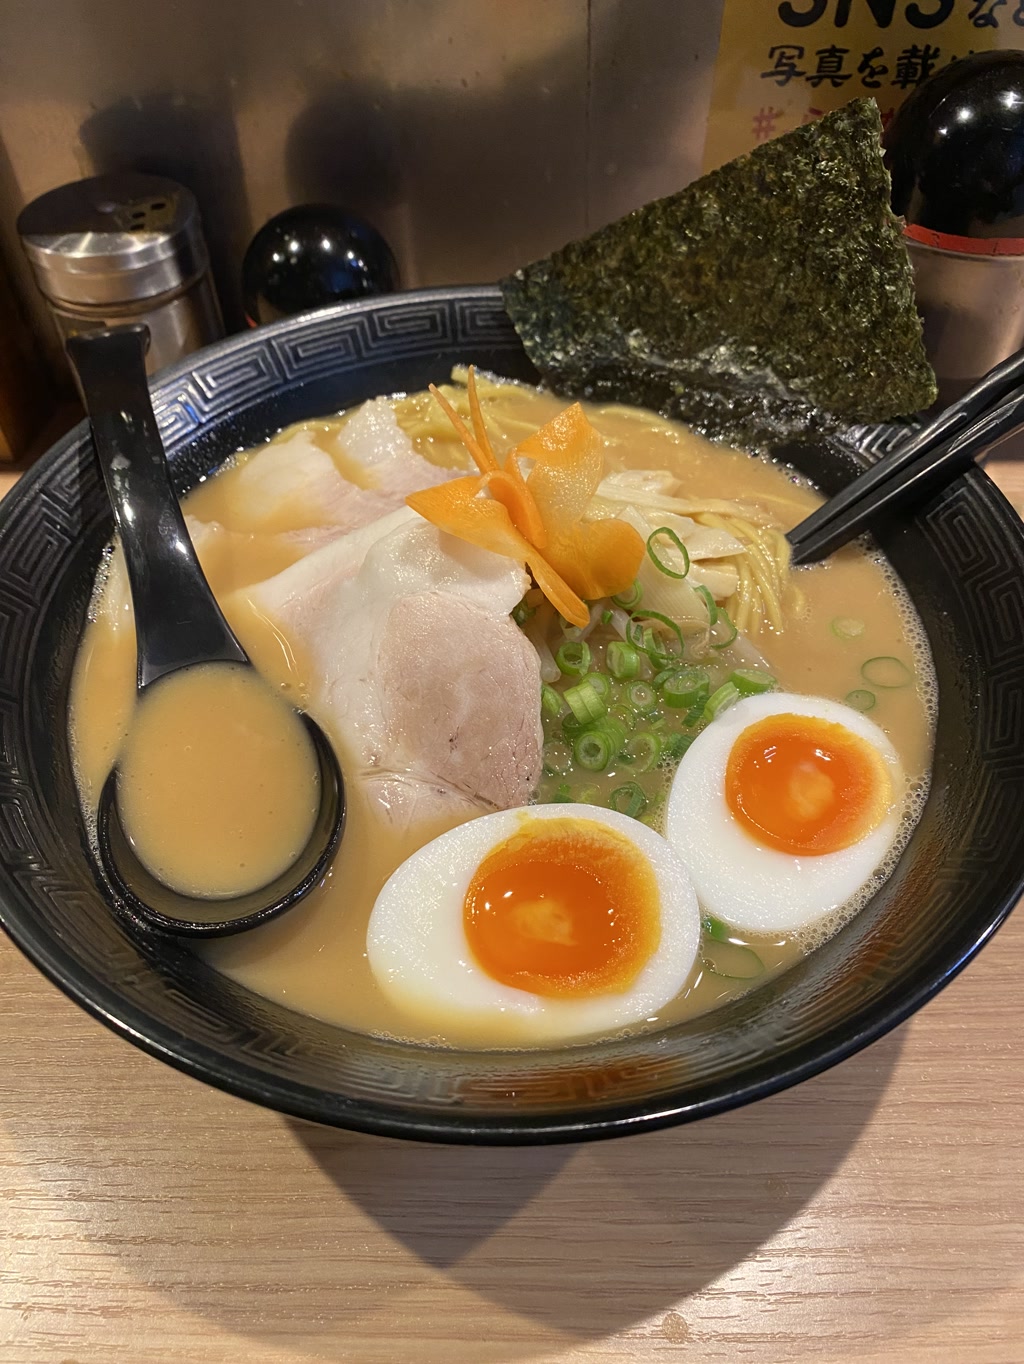 A bowl of ramen with a creamy, possibly tonkotsu-based broth. The bowl contains sliced green onions, two halves of a soft-boiled egg with a semi-solid yolk, slices of tender-looking pork, a single piece of nori (seaweed), and possibly bamboo shoots or sliced fish cake arranged artistically. The ramen noodles are not clearly visible but are likely submerged in the broth. A black spoon and chopsticks rest on top of the bowl, and the tableware has a traditional Asian design. A condiment shaker can be seen in the background, and there's a partial view of a yellow poster or sign with Japanese characters that are not fully visible and therefore the text cannot be fully extracted.